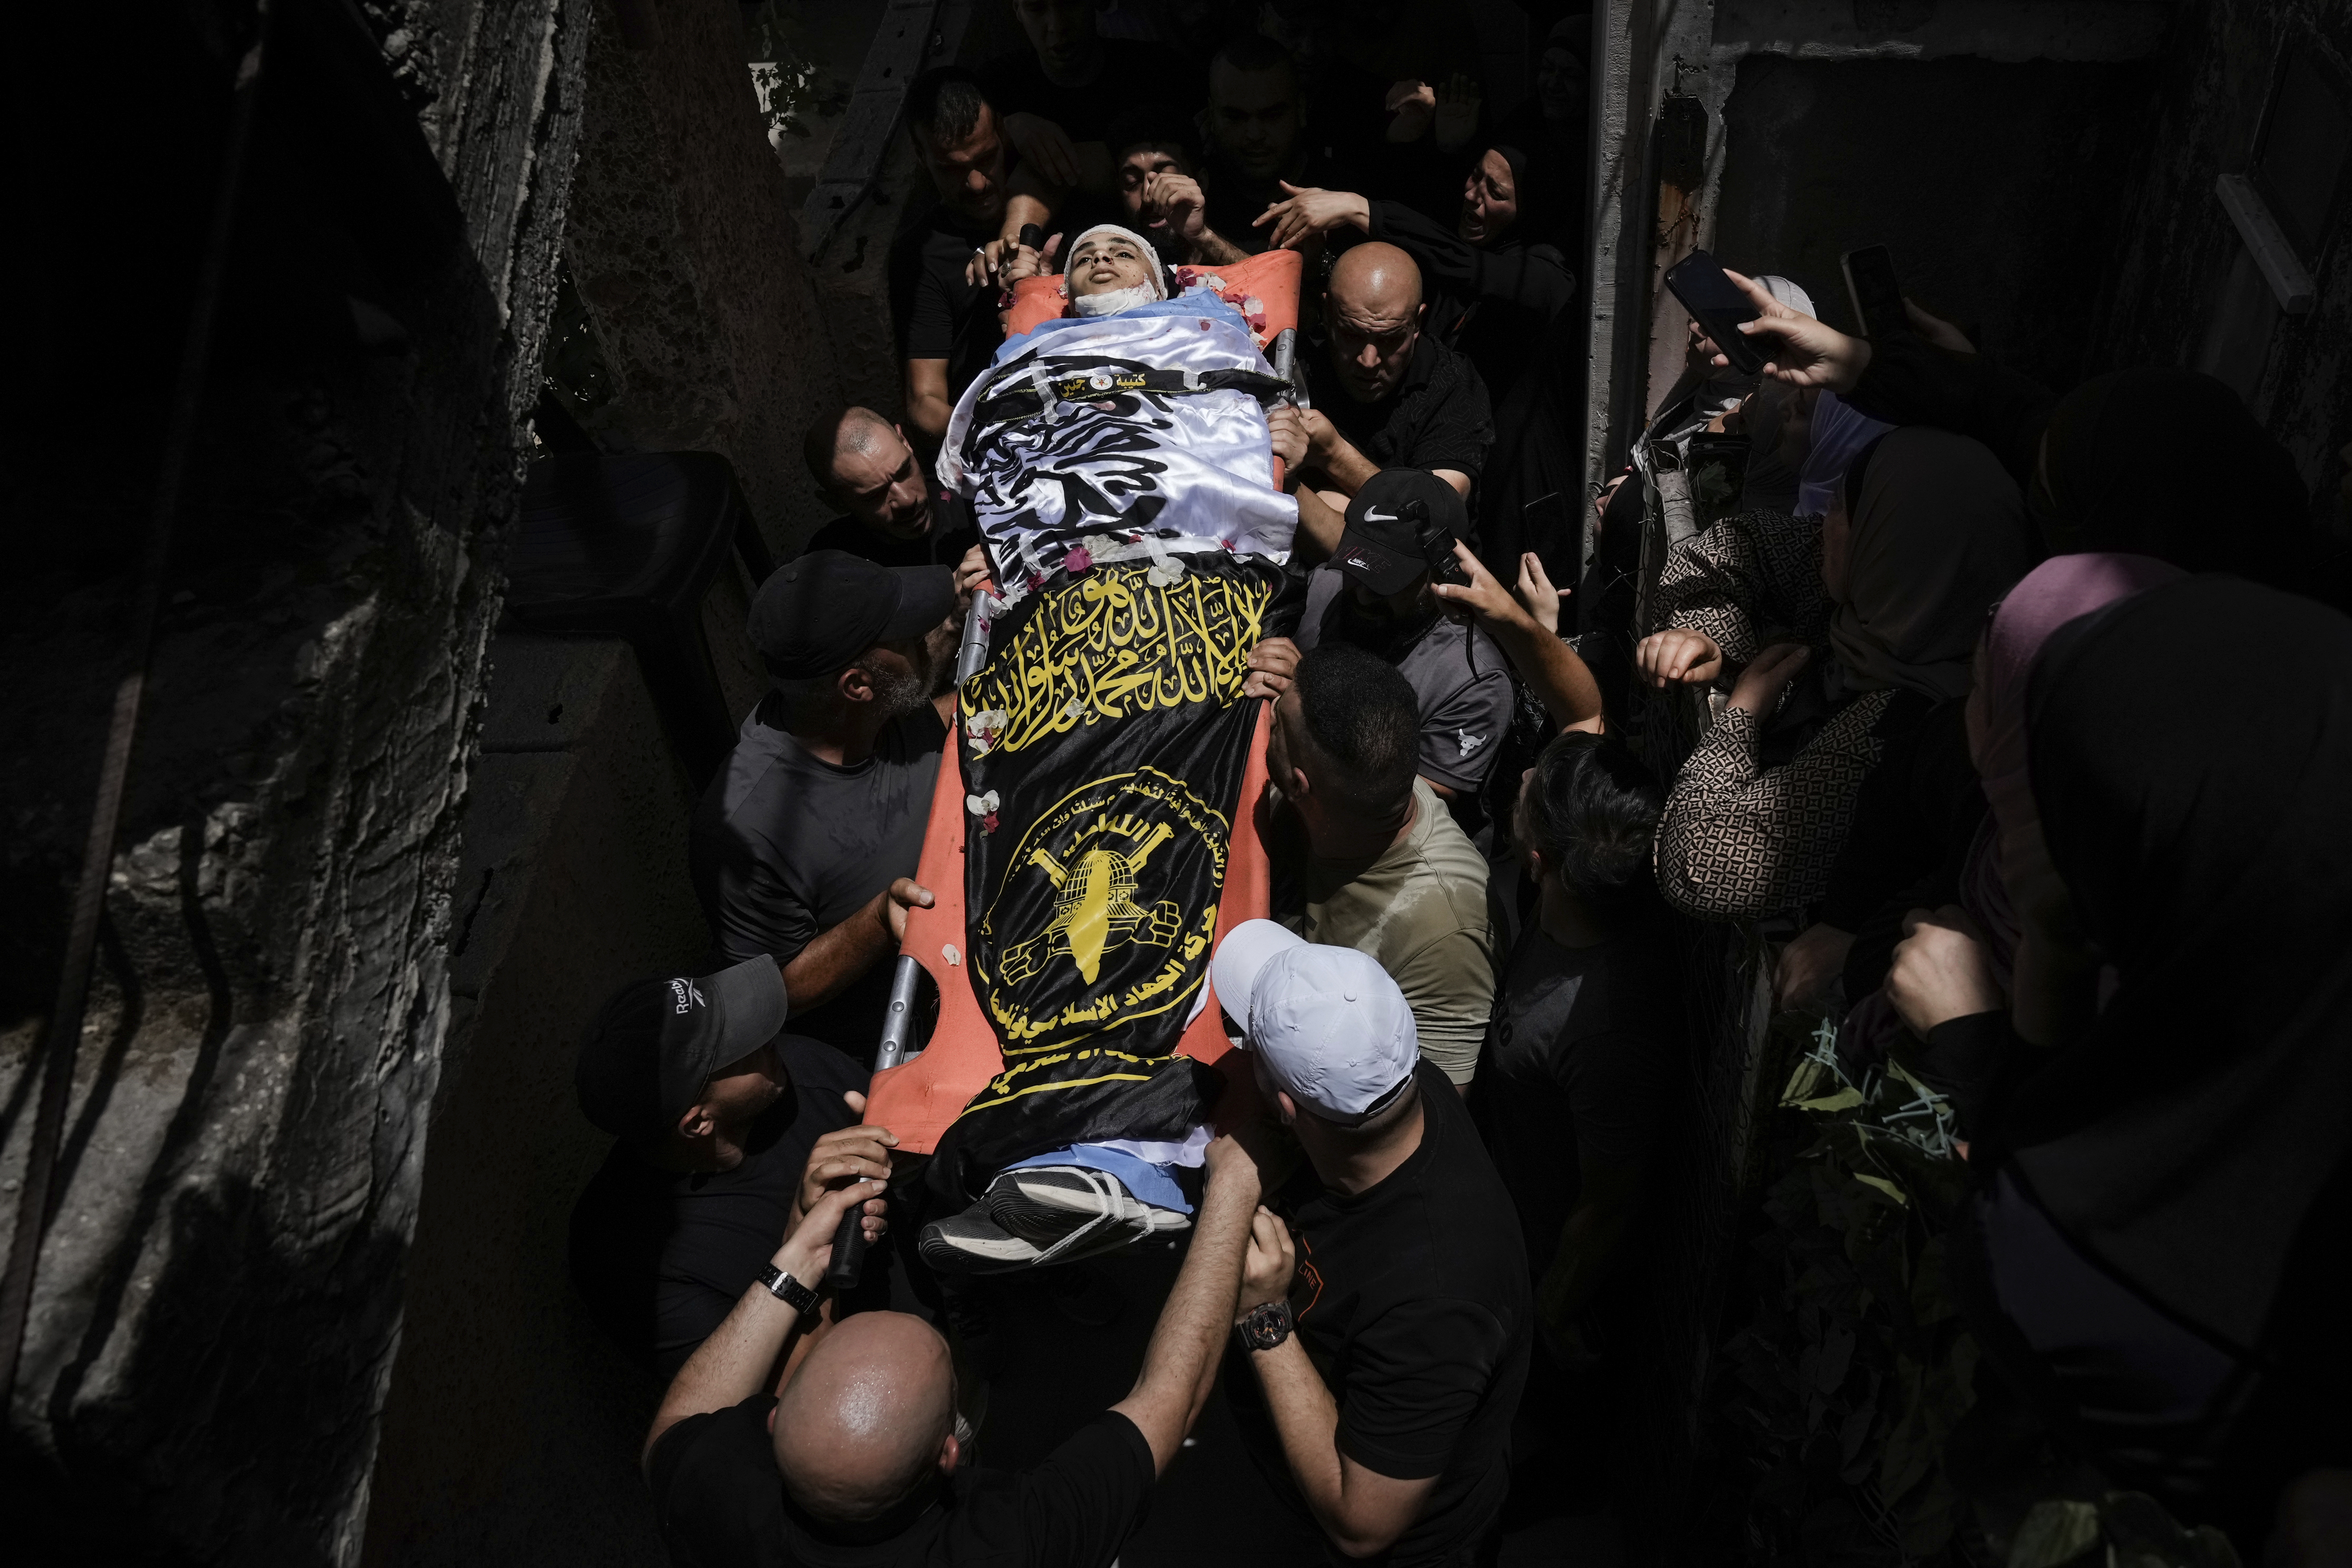 Mourners carry the body of Ahmed Amouri, draped in Palestinian Islamic Jihad militant group flags, during his funeral after he was killed in an Israeli military operation, in Jenin refugee camp in the West Bank city of Jenin, Friday, July 5, 2024. Palestinian authorities say seven people were killed Friday during an Israeli military operation in the area of the West Bank city of Jenin, where the Israeli military said it had been carrying out “counterterrorism activity” that included an airstrike. (AP Photo/Majdi Mohammed)